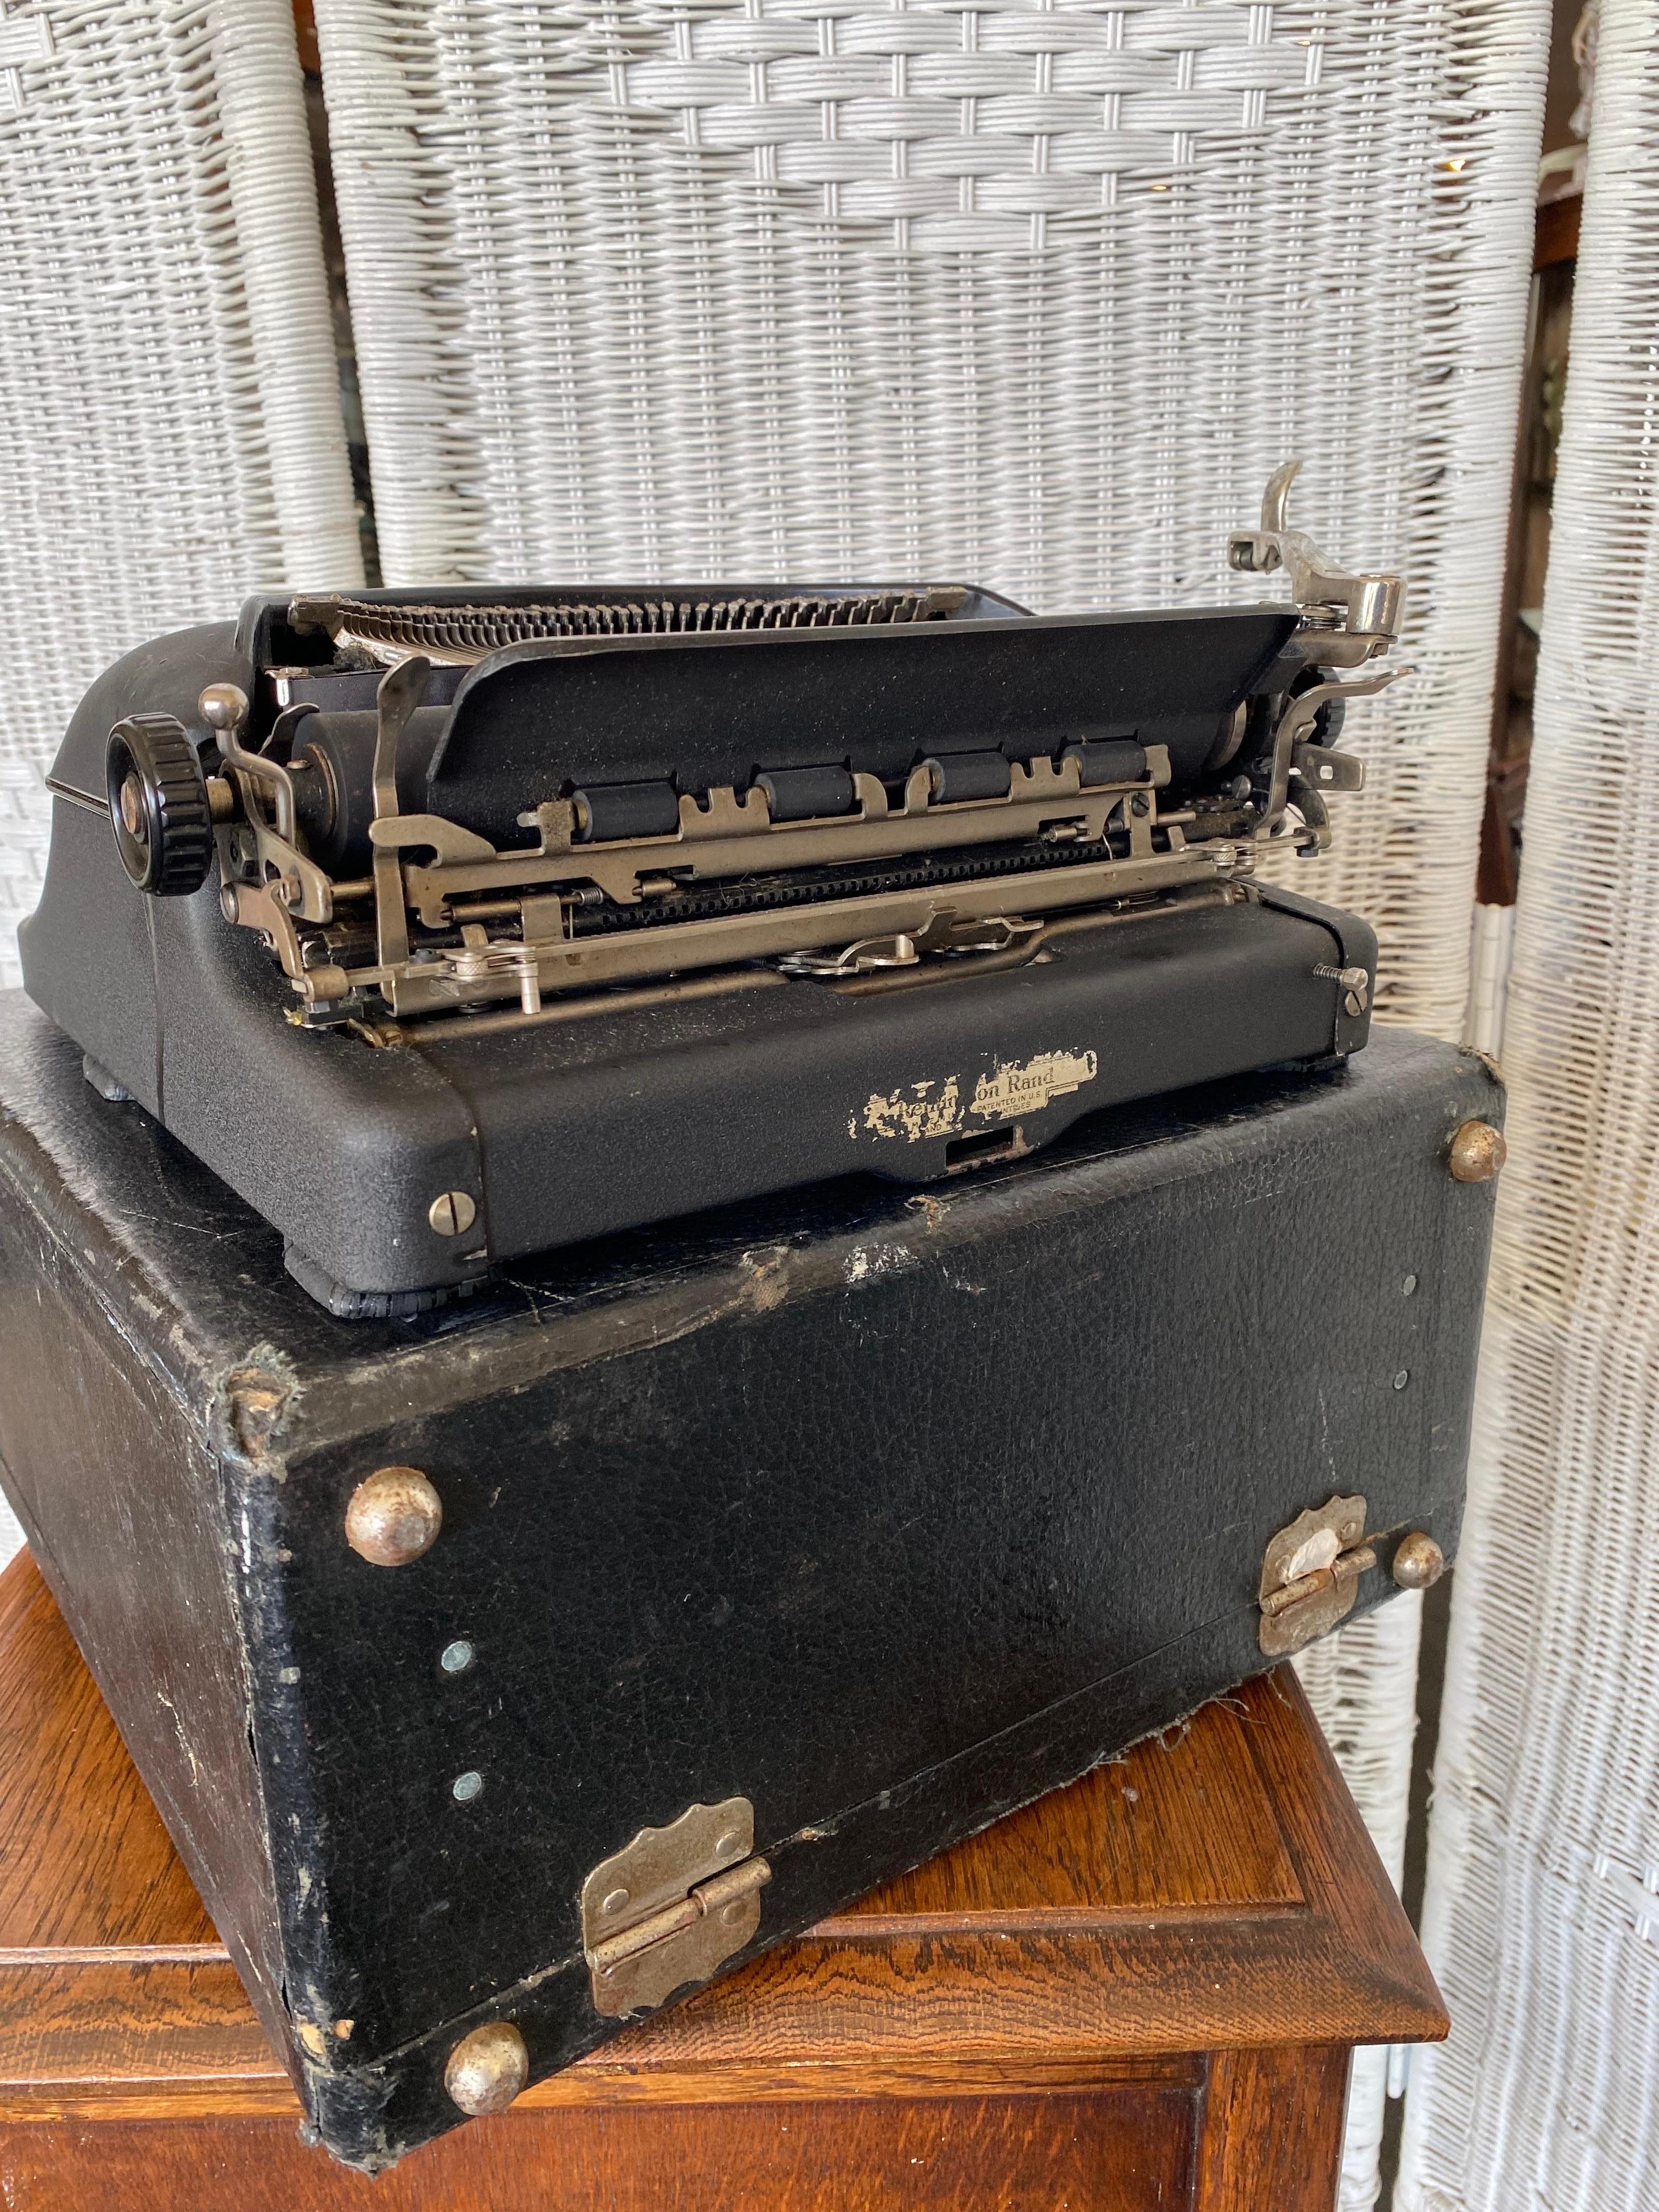 Very cool circa 1940s black Remington model 5 typewriter, with original carrying case. This typewriter works like a charm and types smooth without any hindering which is an indication of excellent craftsmanship.
Another exceptional feet is the